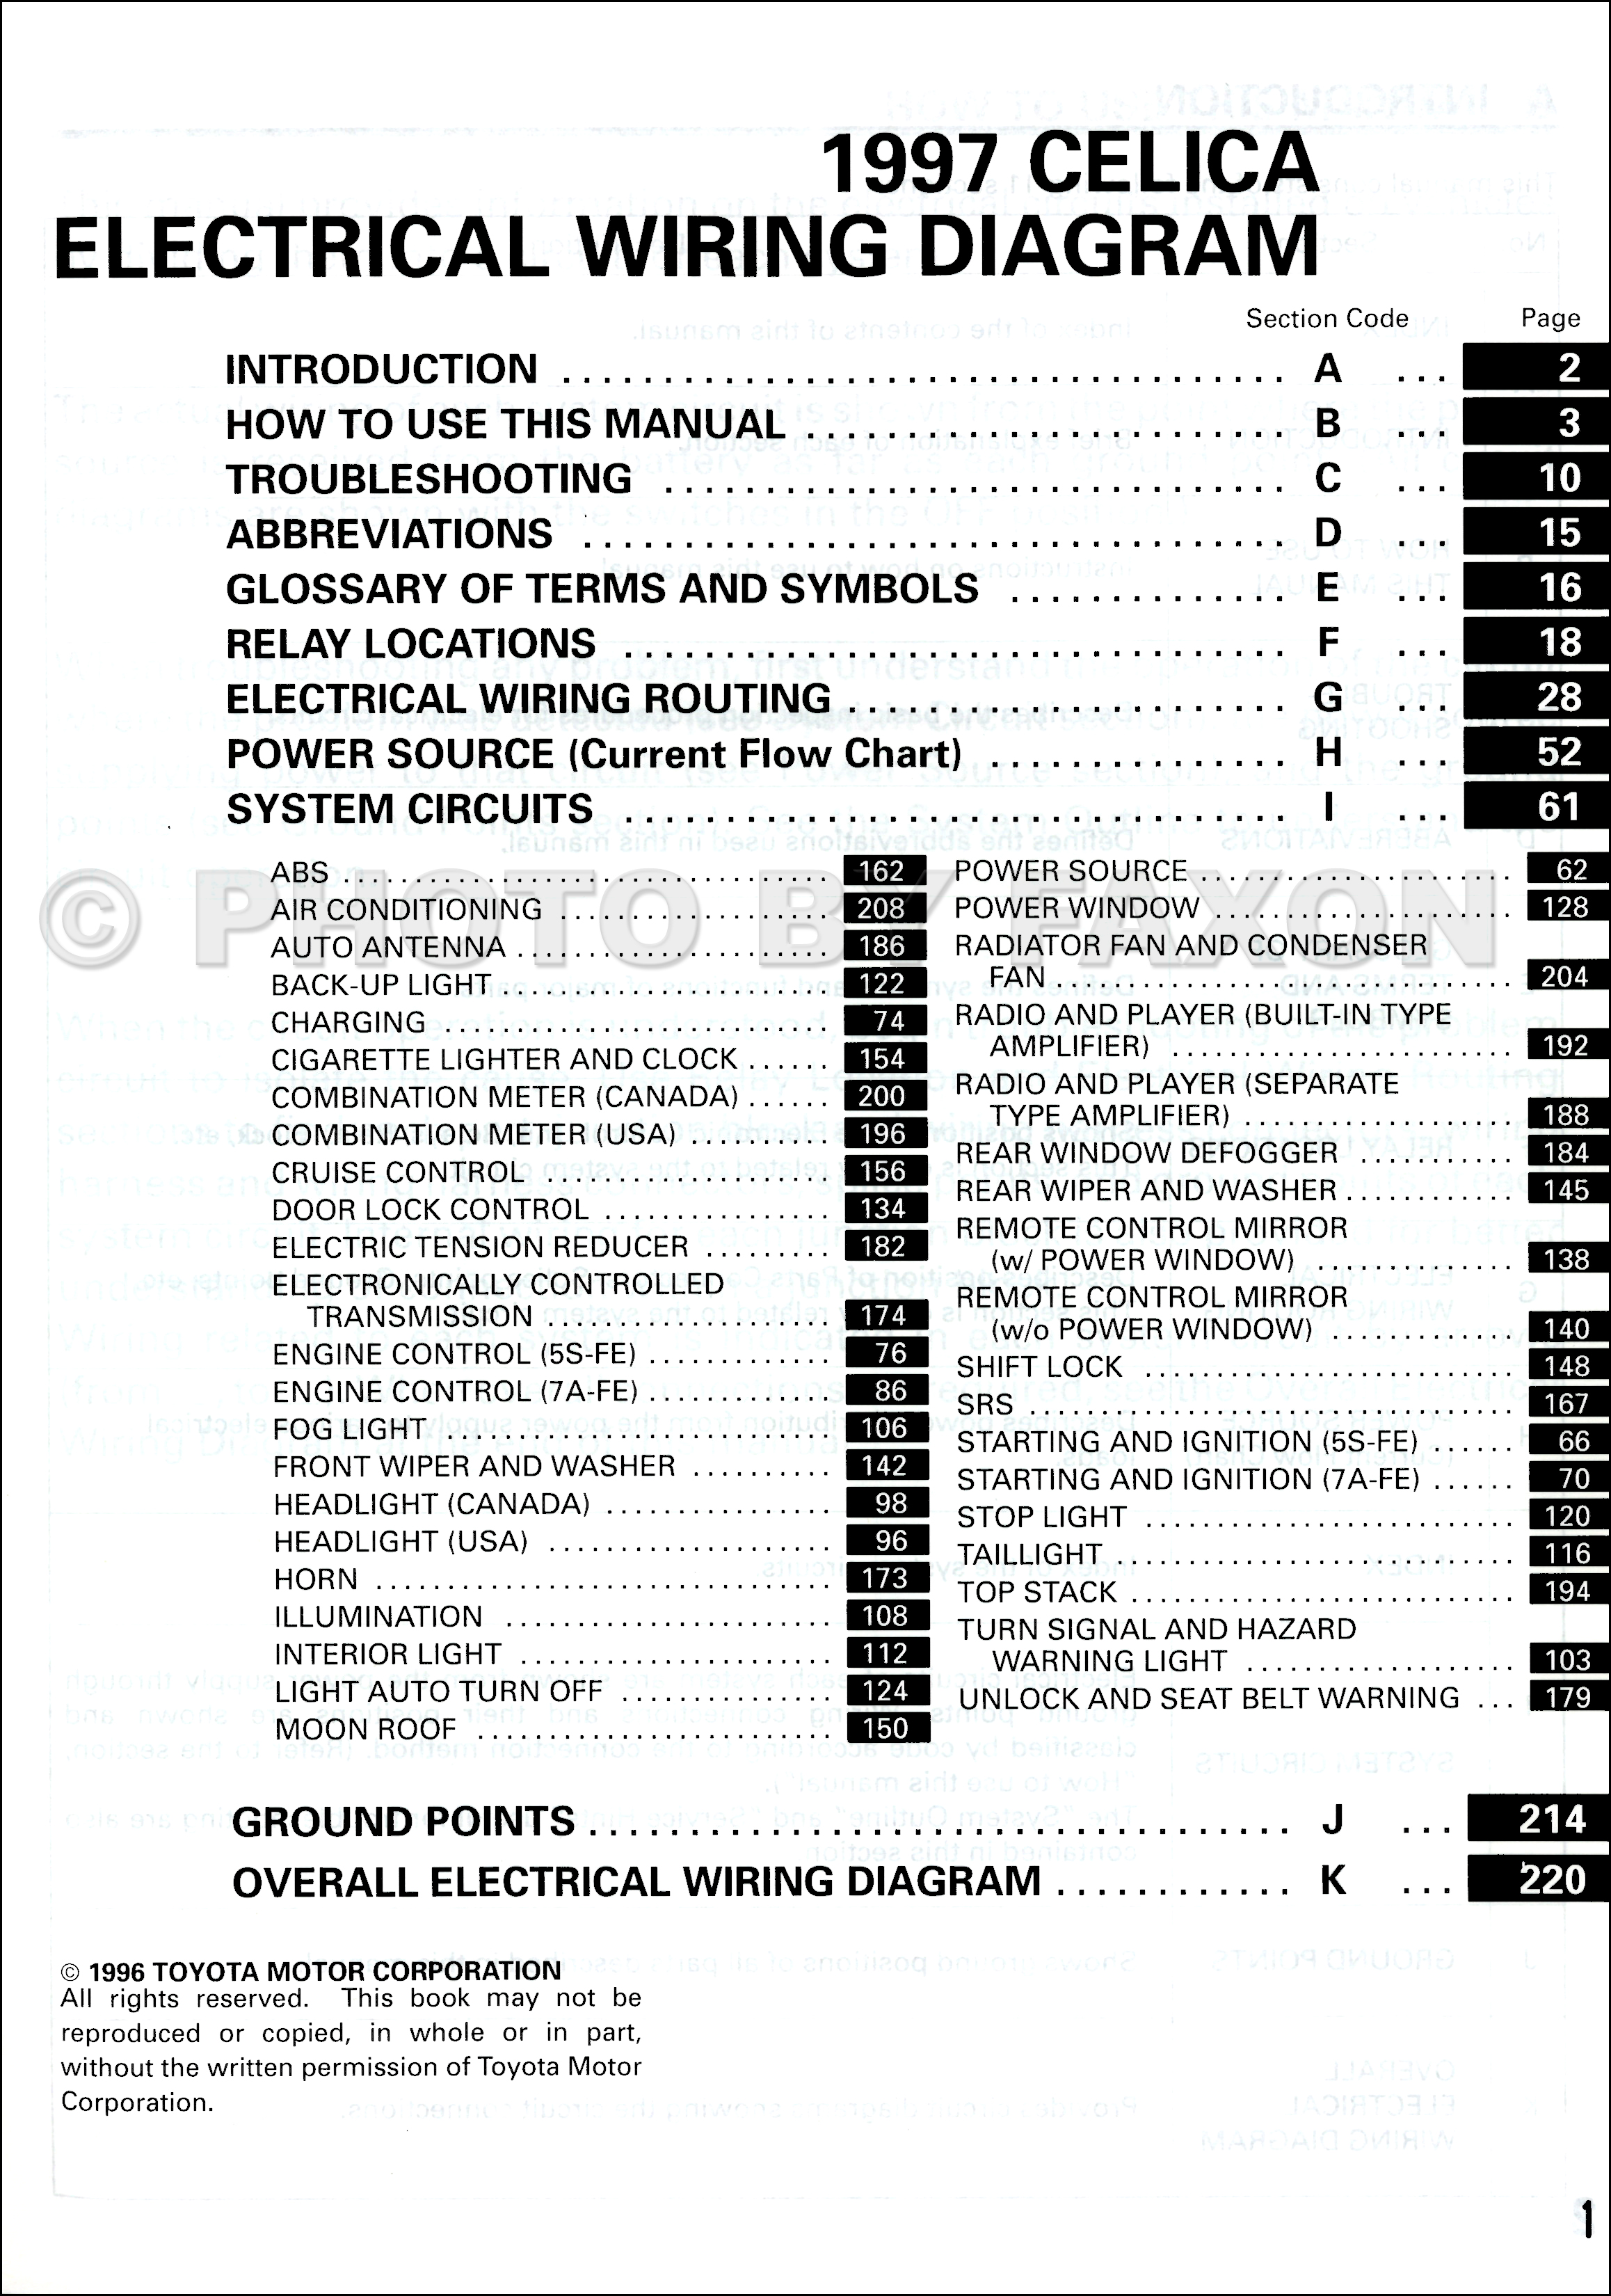 2005 Toyota CELICA Electrical Wiring Diagrams Service Manual 